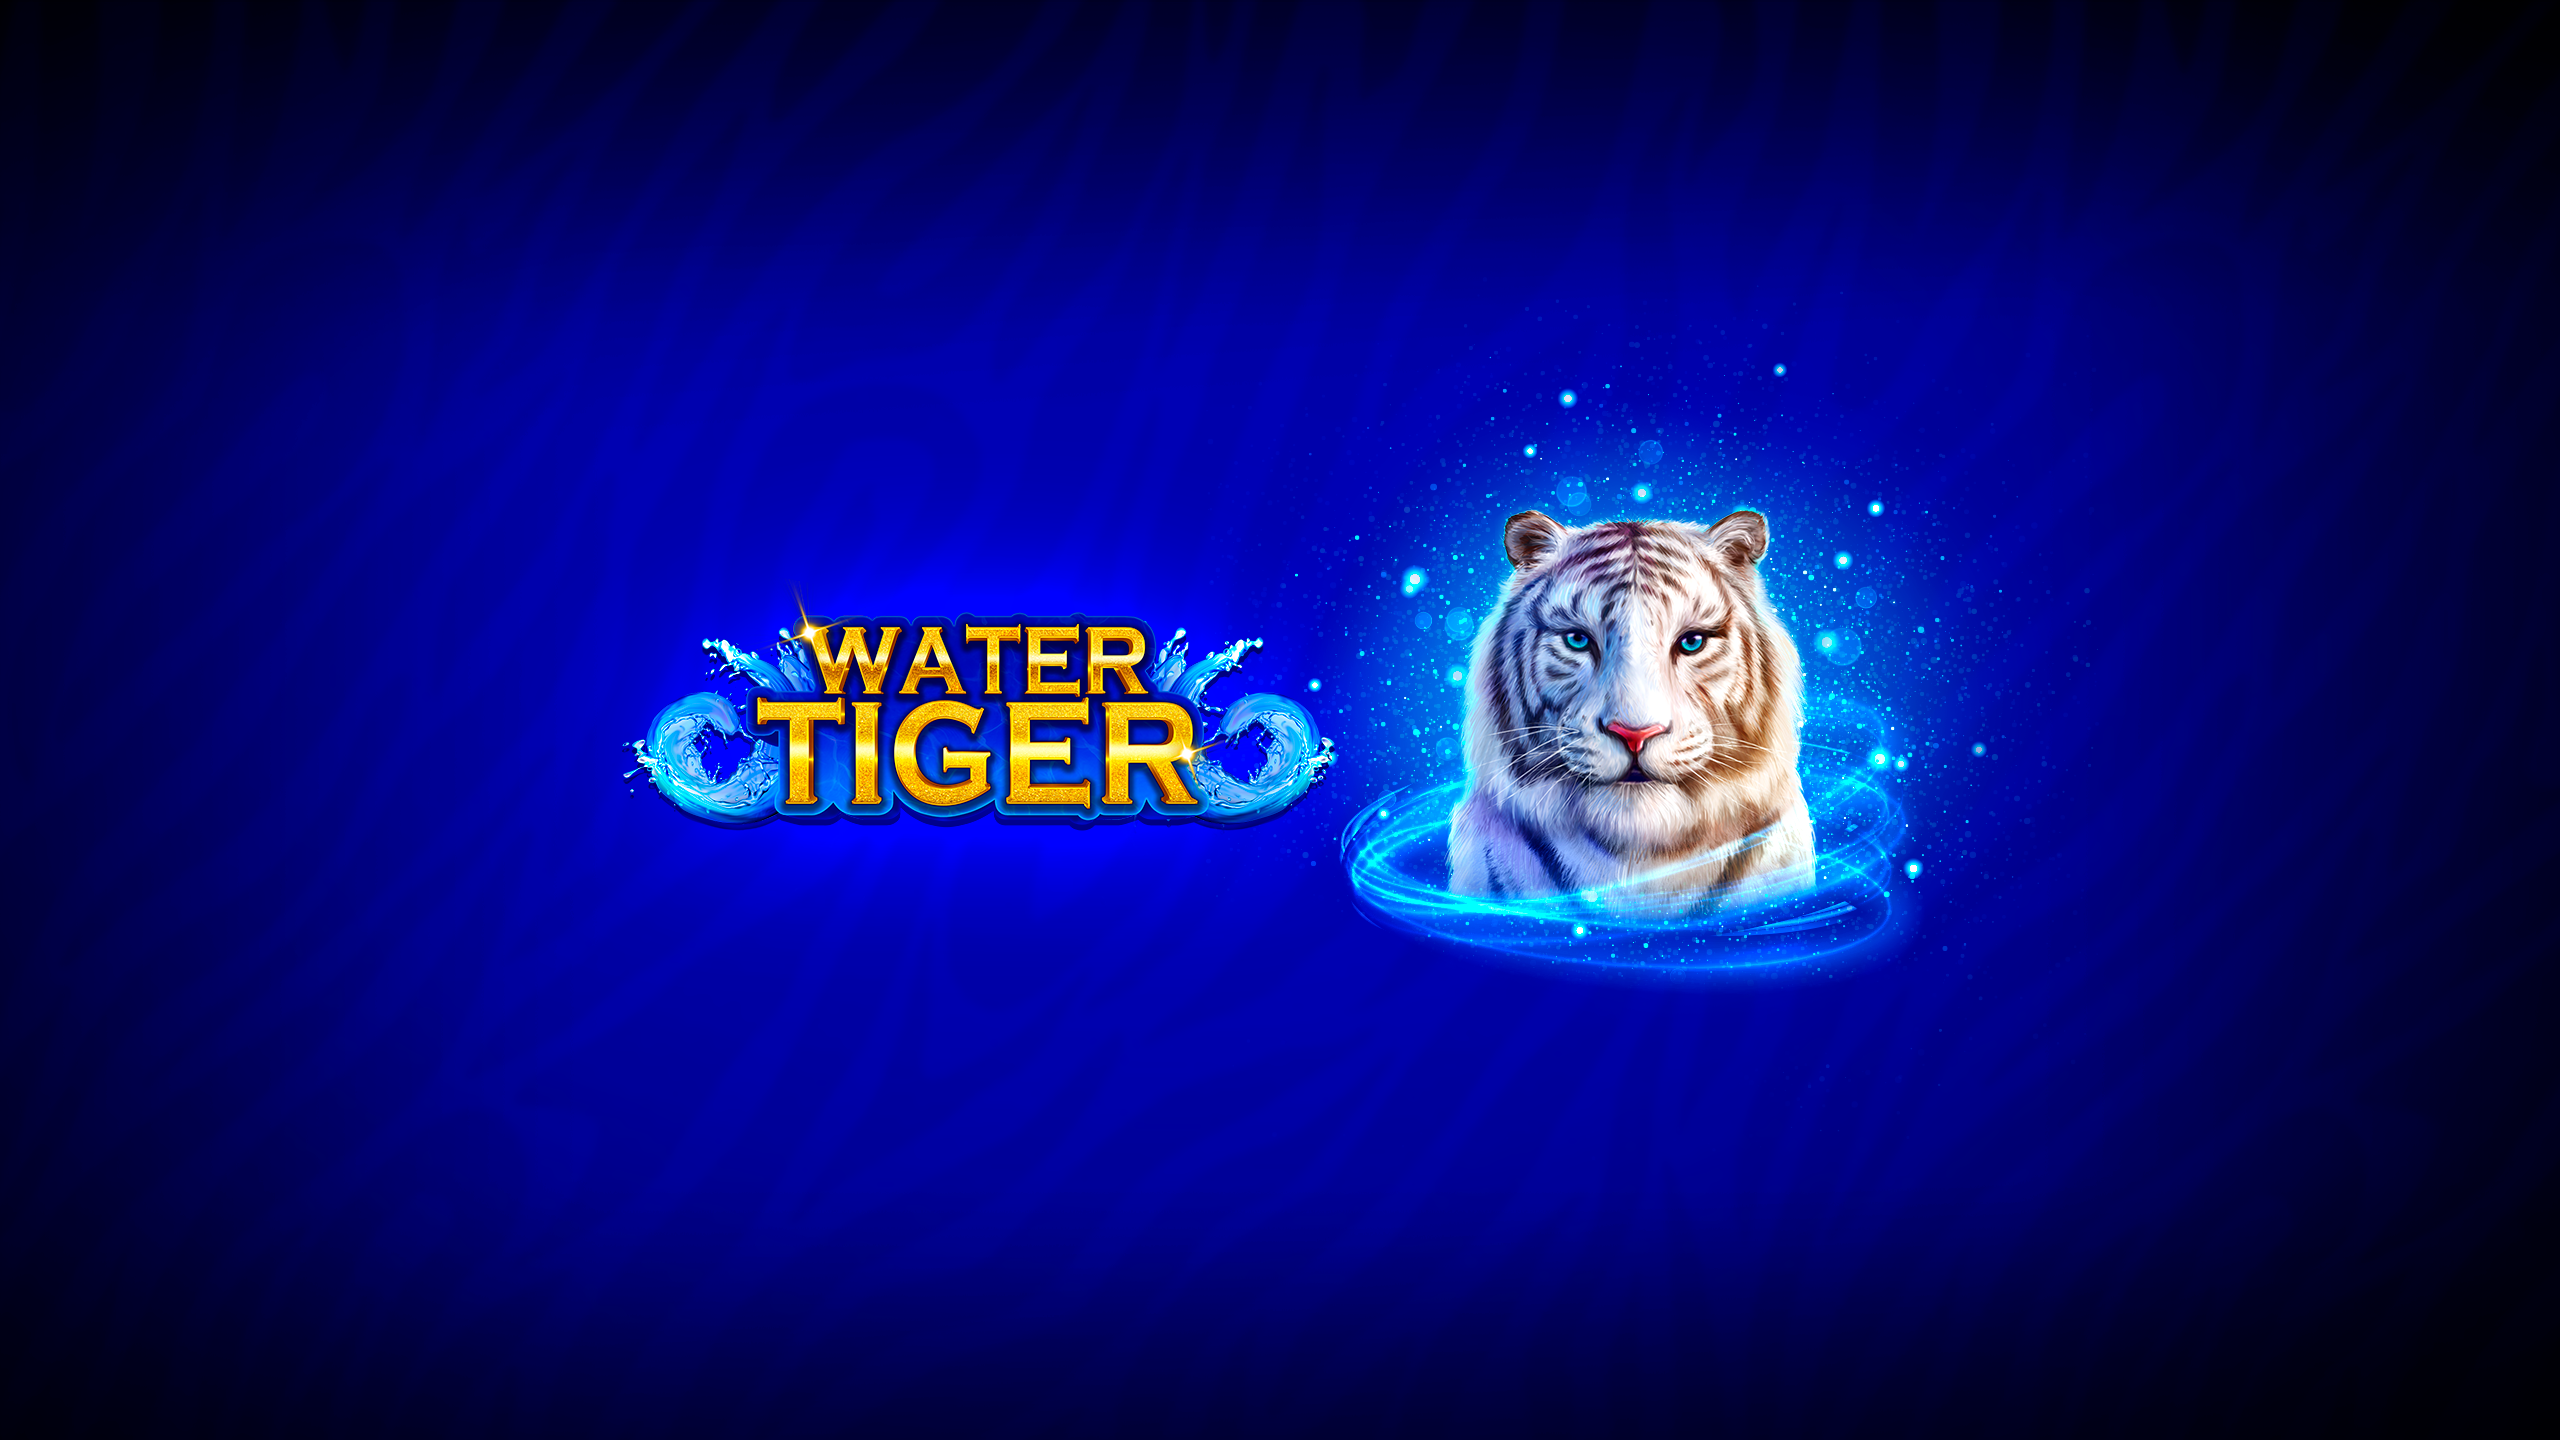 The Water Tiger Online Slot Demo Game by Endorphina